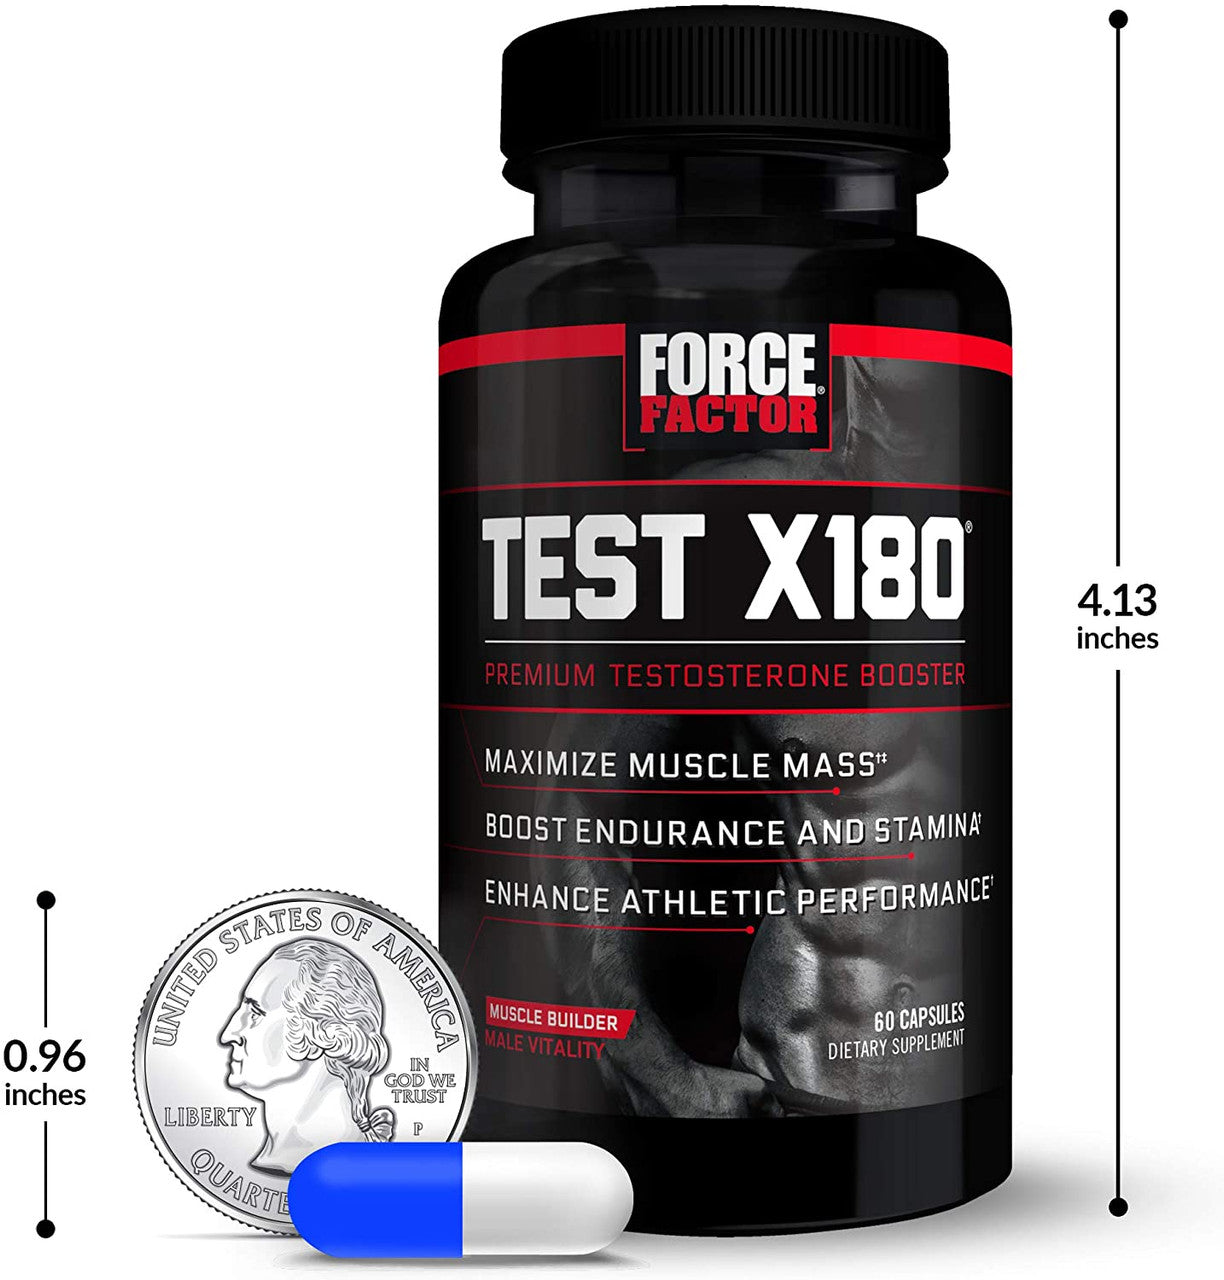 Force Factor Test X180 actual size